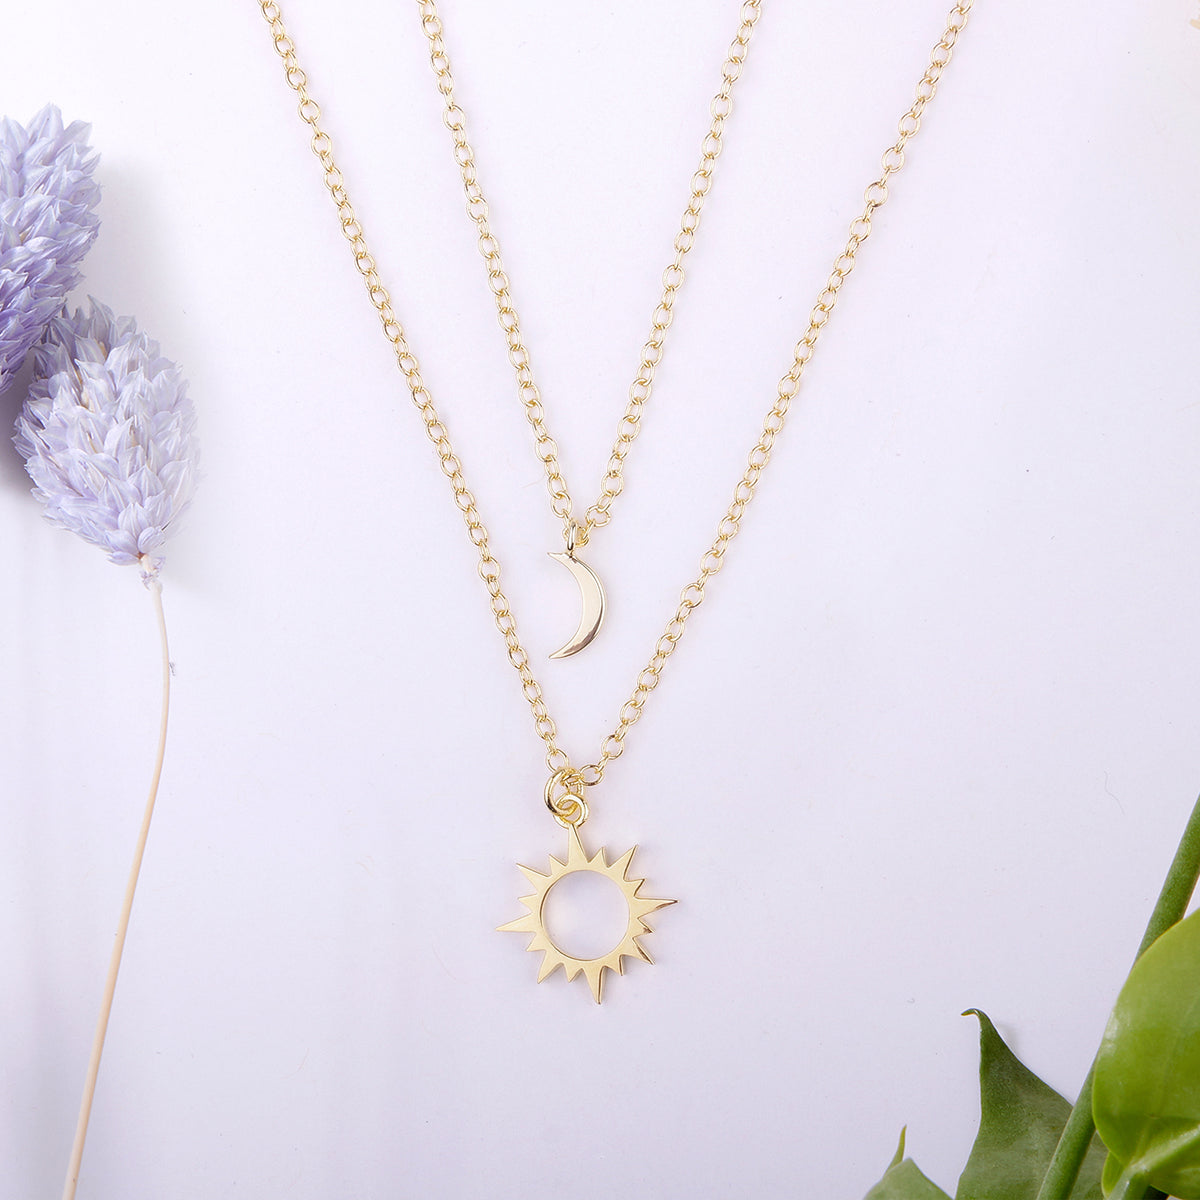 Wife Sun and Moon Pendants Necklace Set